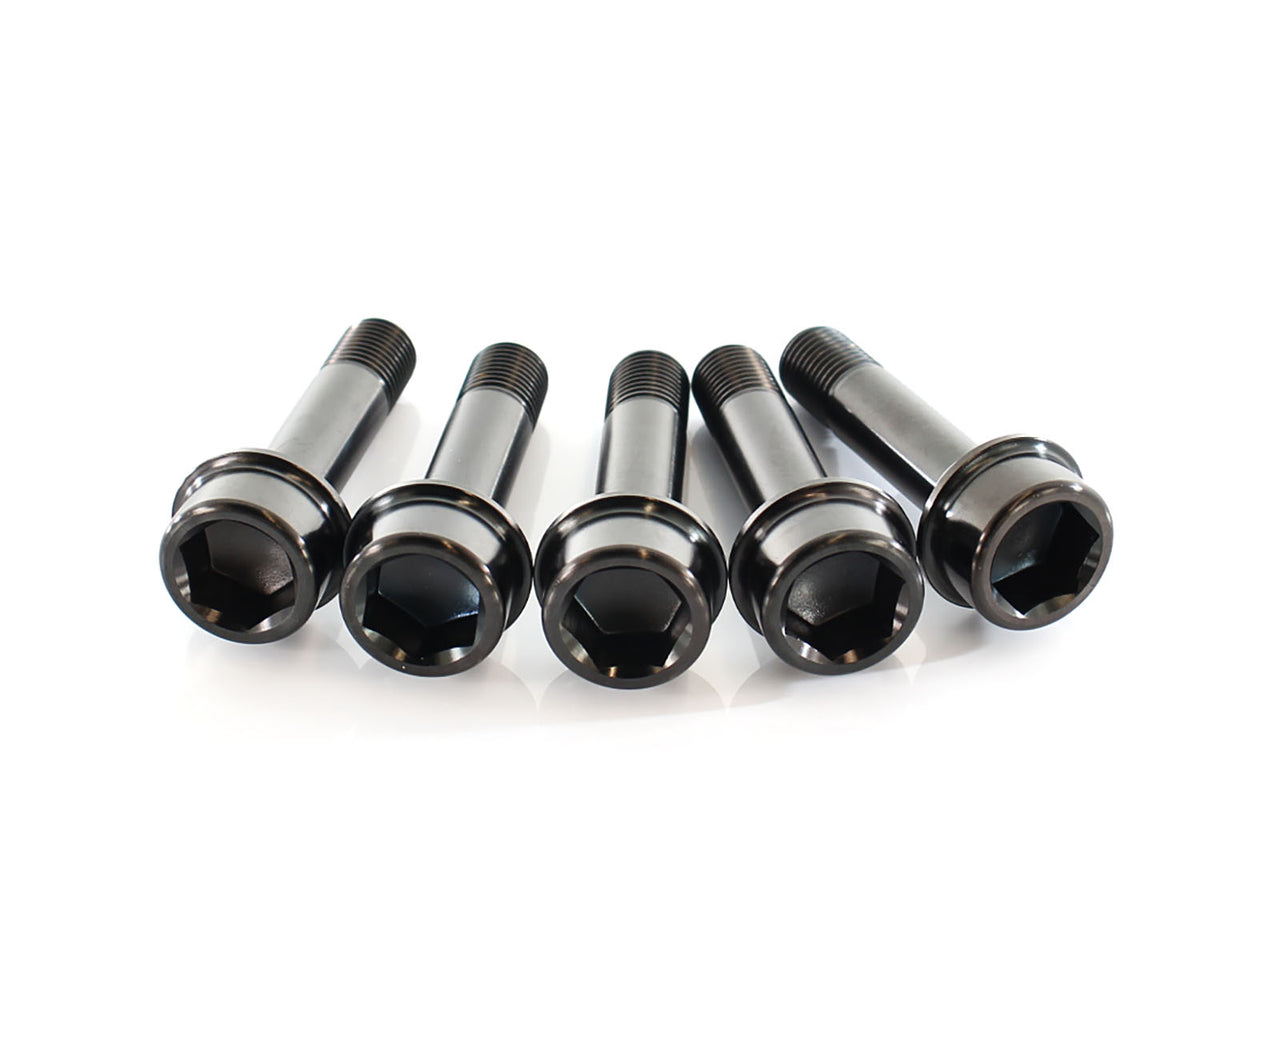 Set of ten Ferrari titanium lug bolts in black or silver best price lowest price for ultra strong Ti bolts.